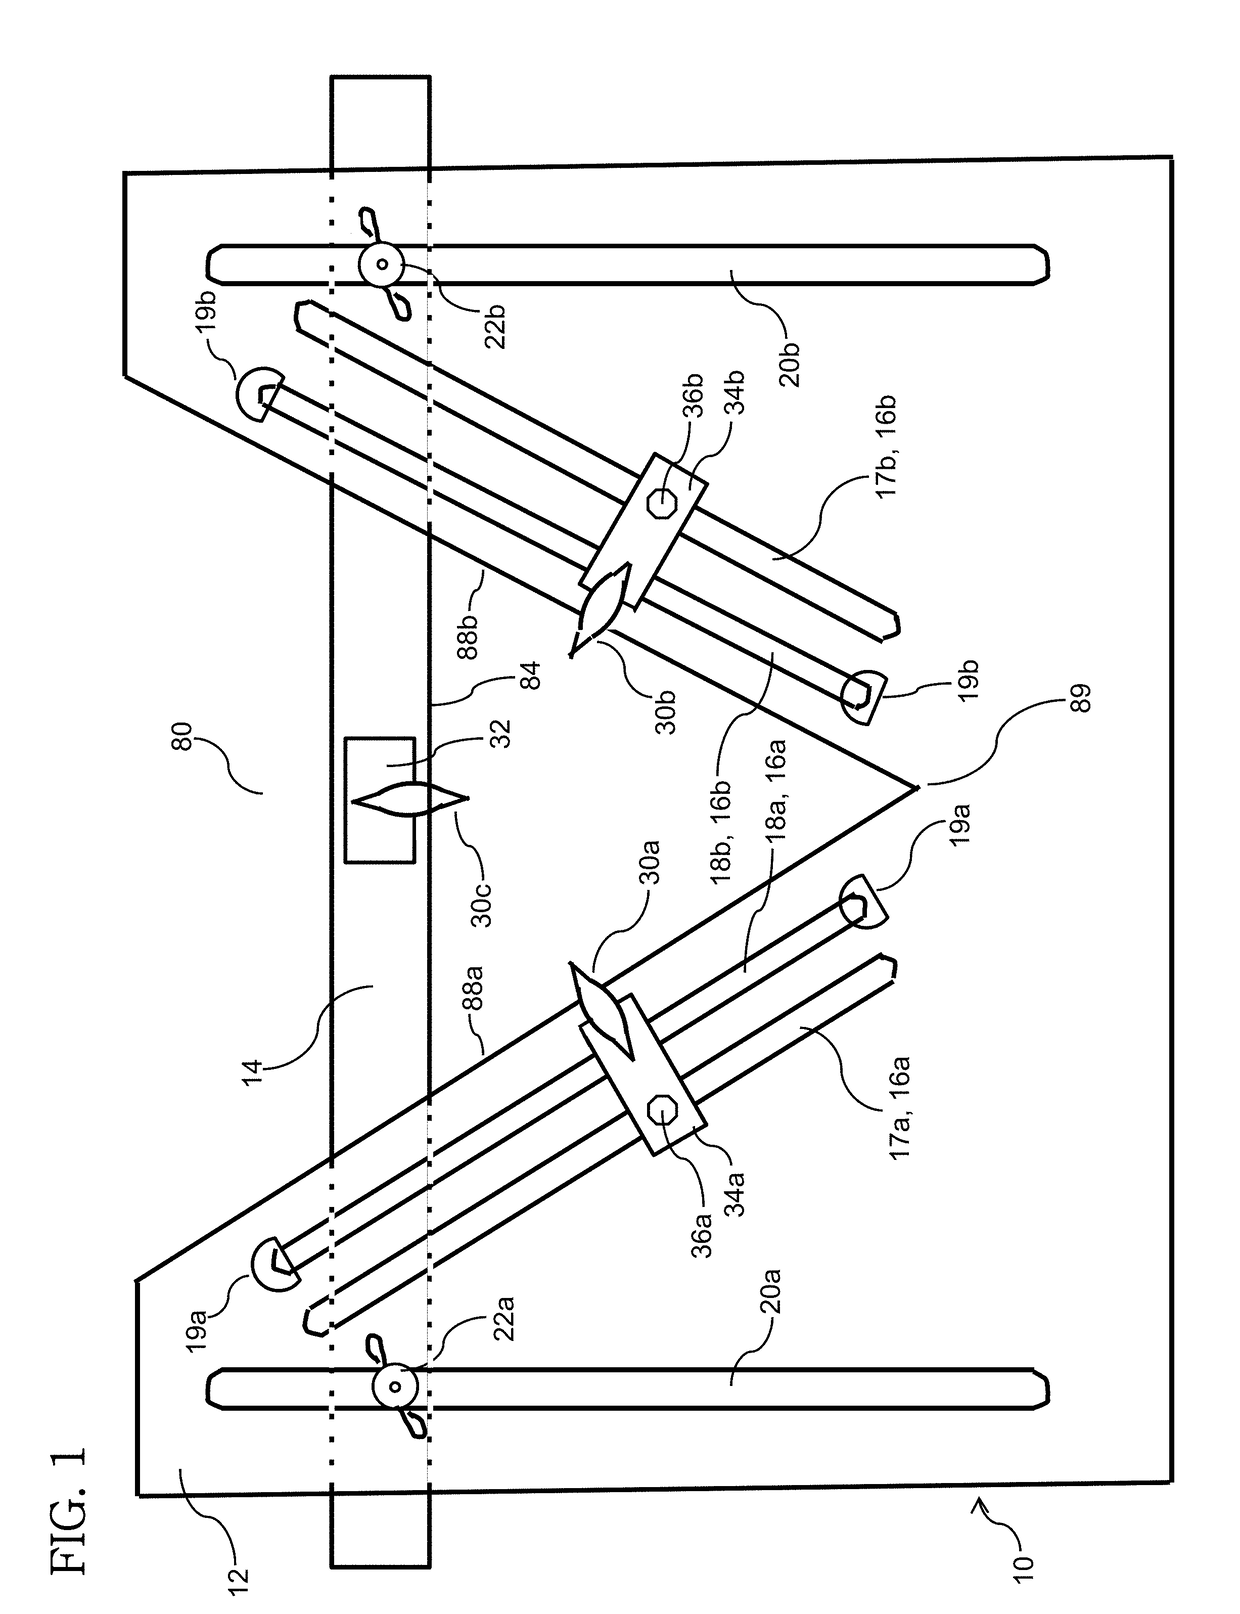 Cutting device for removing a cable jacket